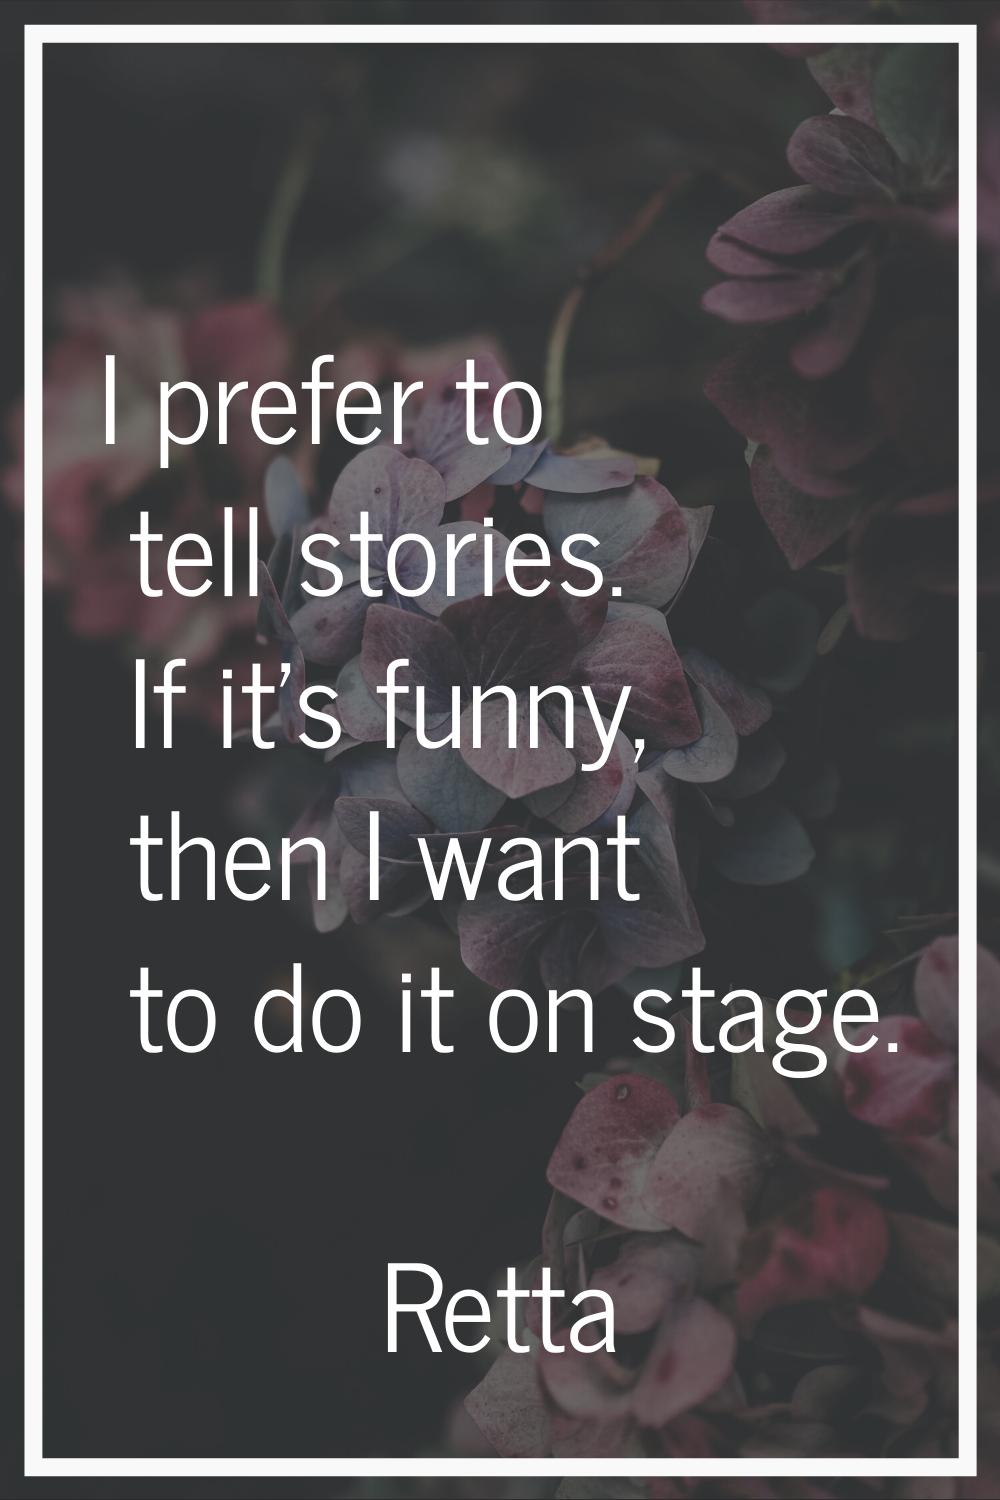 I prefer to tell stories. If it's funny, then I want to do it on stage.